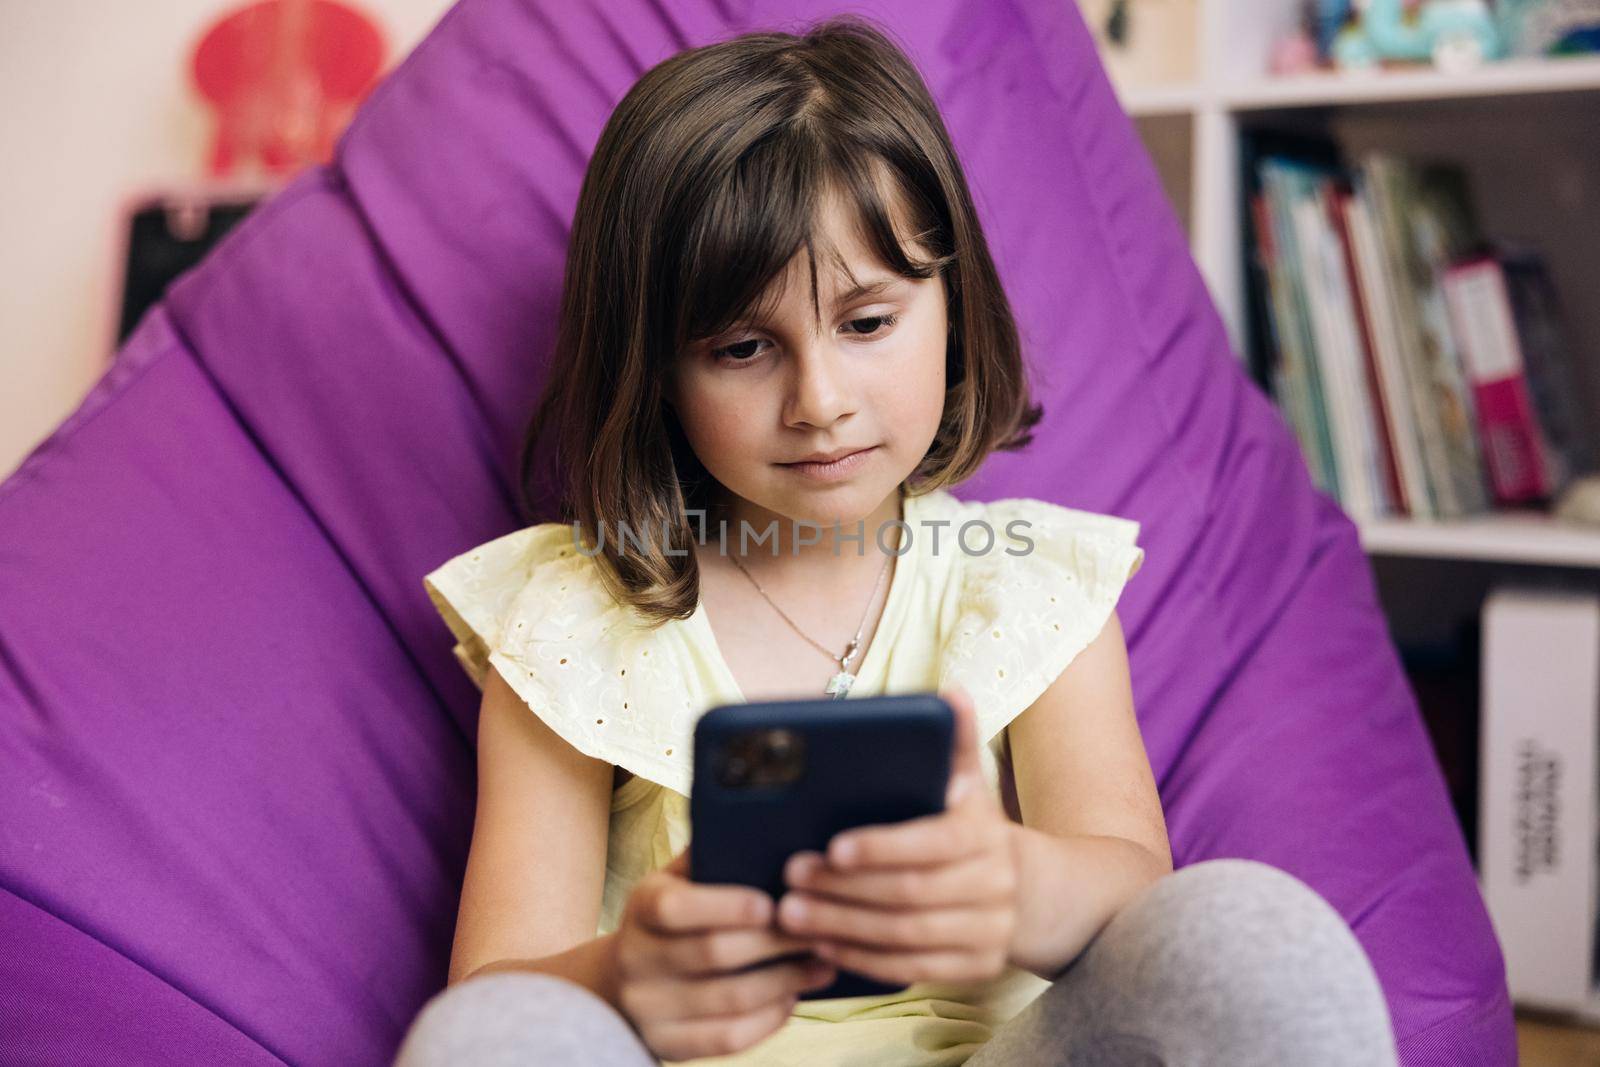 Kid Using Smartphone, Child Browsing Internet on Smart Phone, Teenager Girl Communicating with Parents, Technology on Device. Girl using mobile phone or chat.